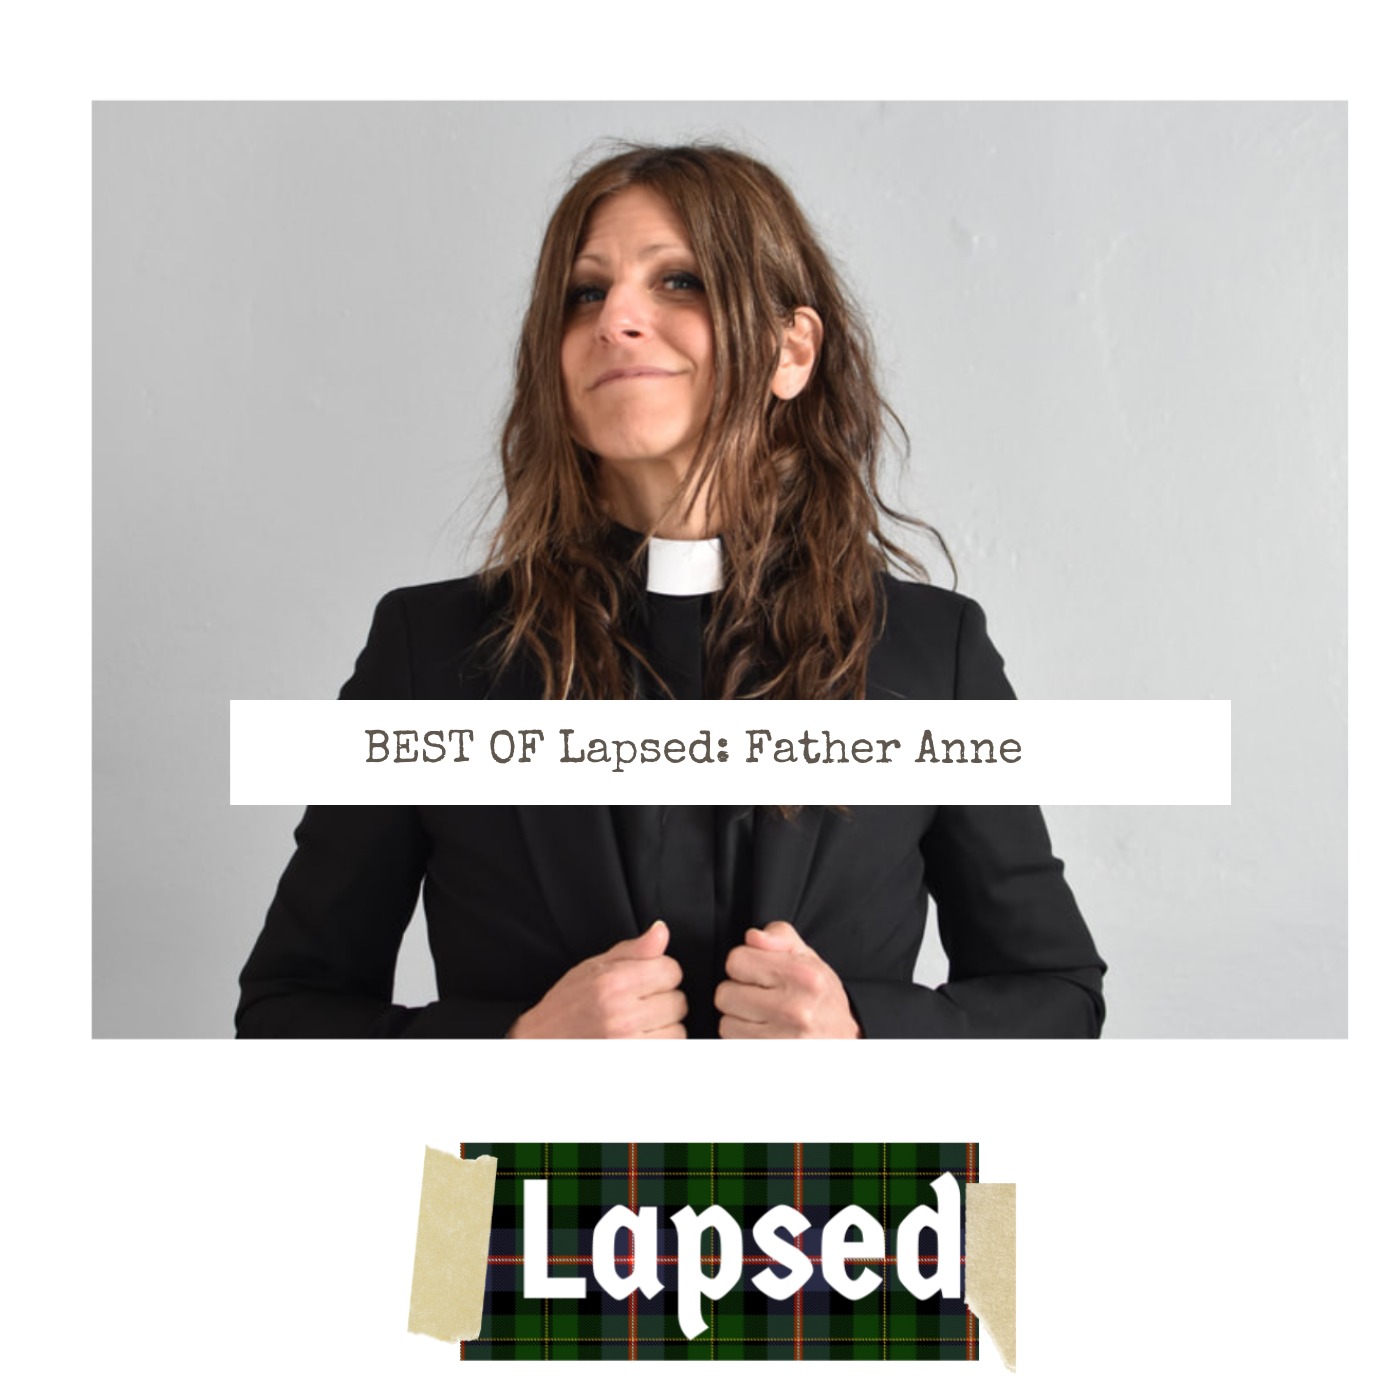 BEST OF LAPSED: Father Anne